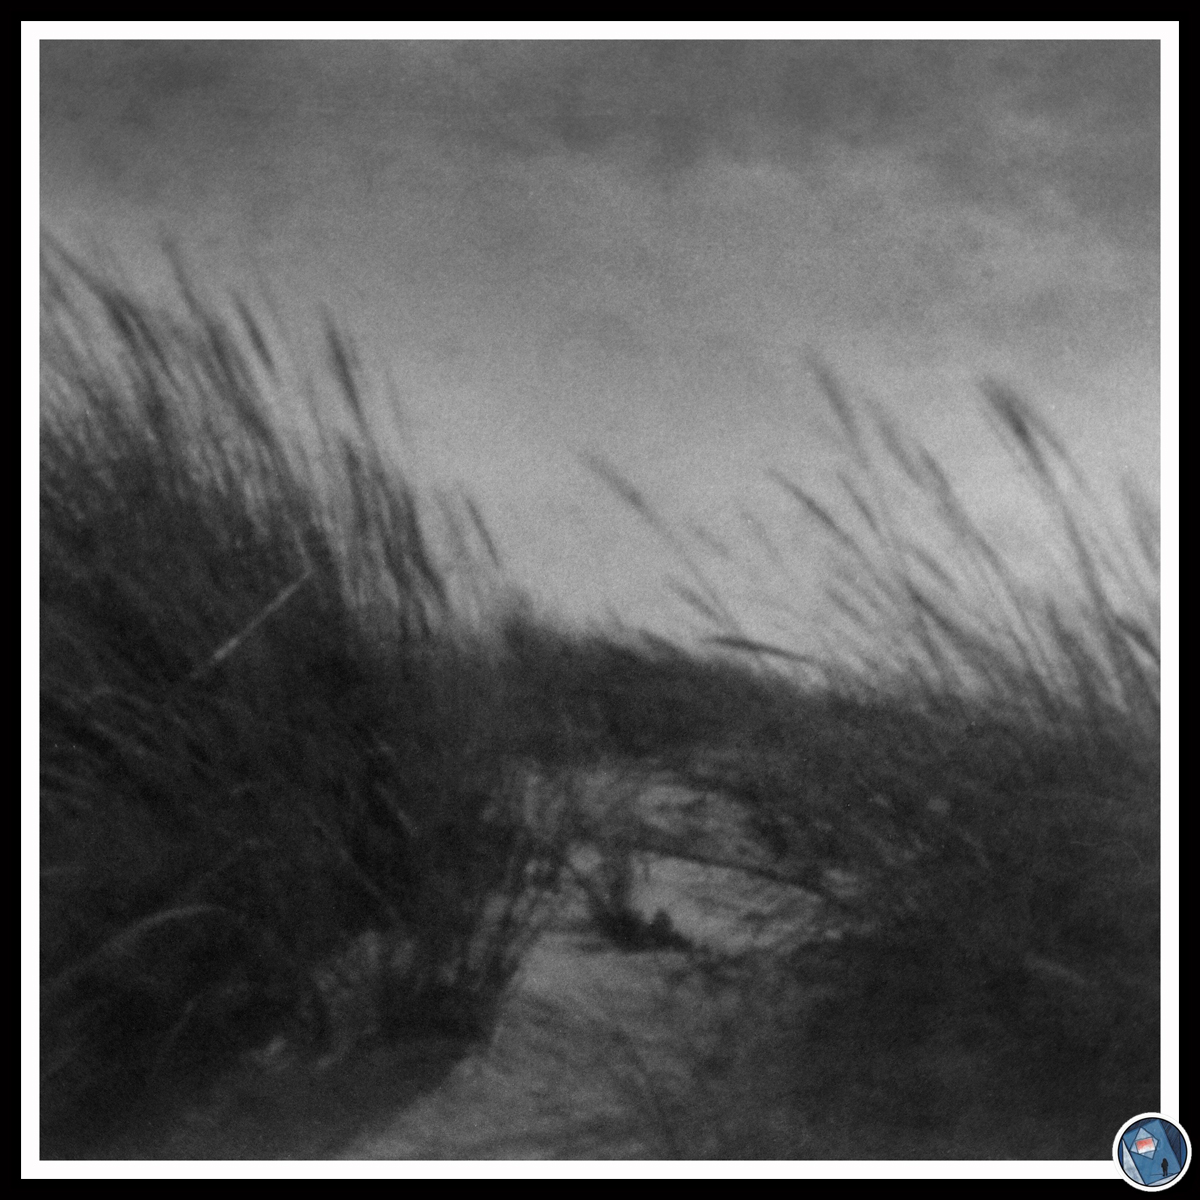 ___Harmless stuff___
+The wild grasses +
.
#filmphotography #stenope 
📷 #ricohxr1 fitted with pinhole/sténopé
🎞 #35mmfilm #fomapan400 developed in #caffenol
.
#pinhole #pinholephotography #pinholeonfilm #pinholecamera #photography #seascape #landscapephotography